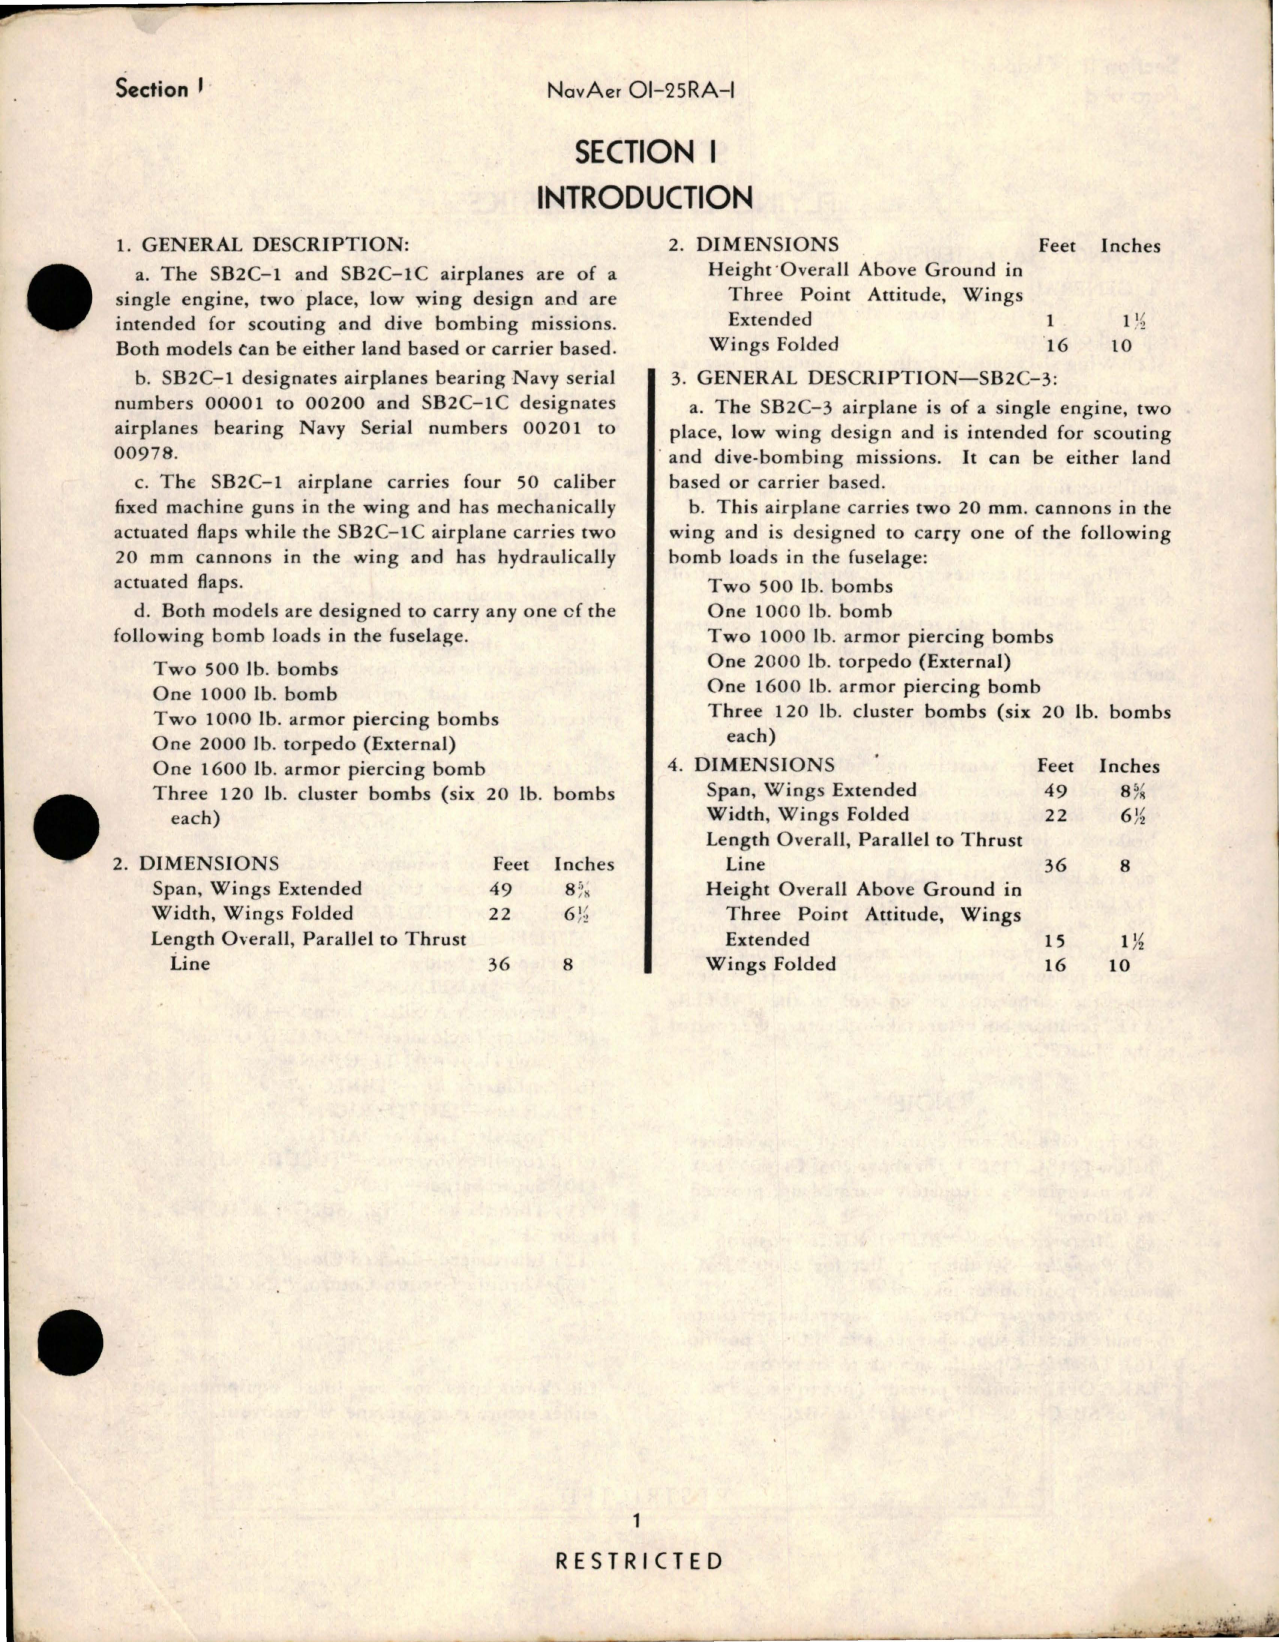 Sample page 5 from AirCorps Library document: Pilot's Handbook of Flight Operating Instructions for SB2C-1, SB2C-1C, SB2C-3, SBF-1, SBF-2, SBW-1, SBW-2 and Helldiver